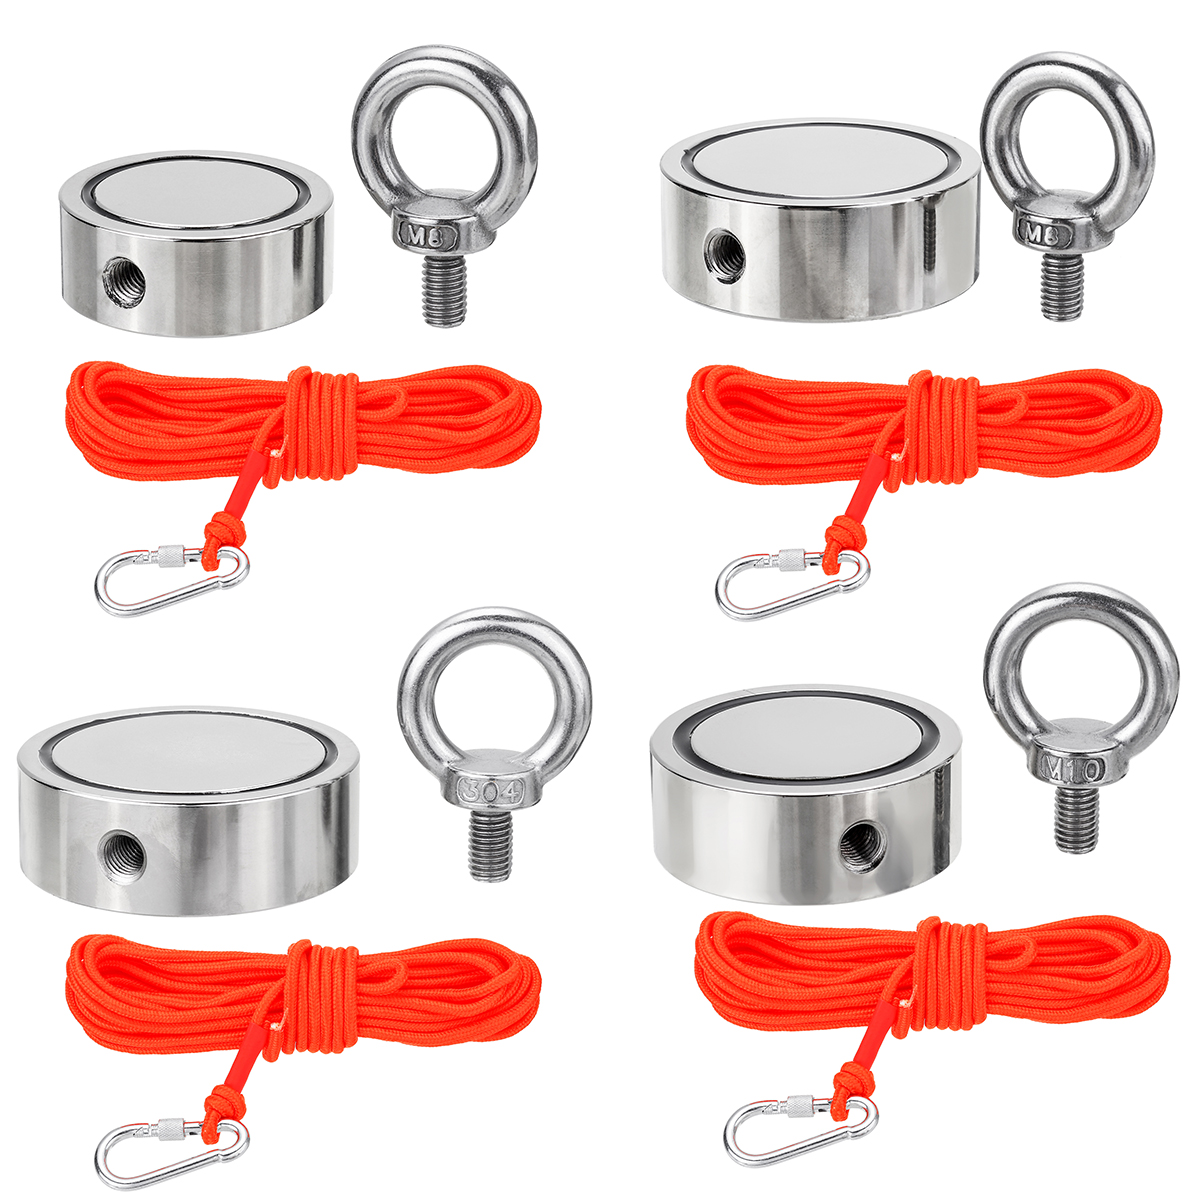 Find 80 200KG Double Side Neodymium Fishing Salvage Recovery Magnet with 10M Rope for Detecting Metal Treasure for Sale on Gipsybee.com with cryptocurrencies